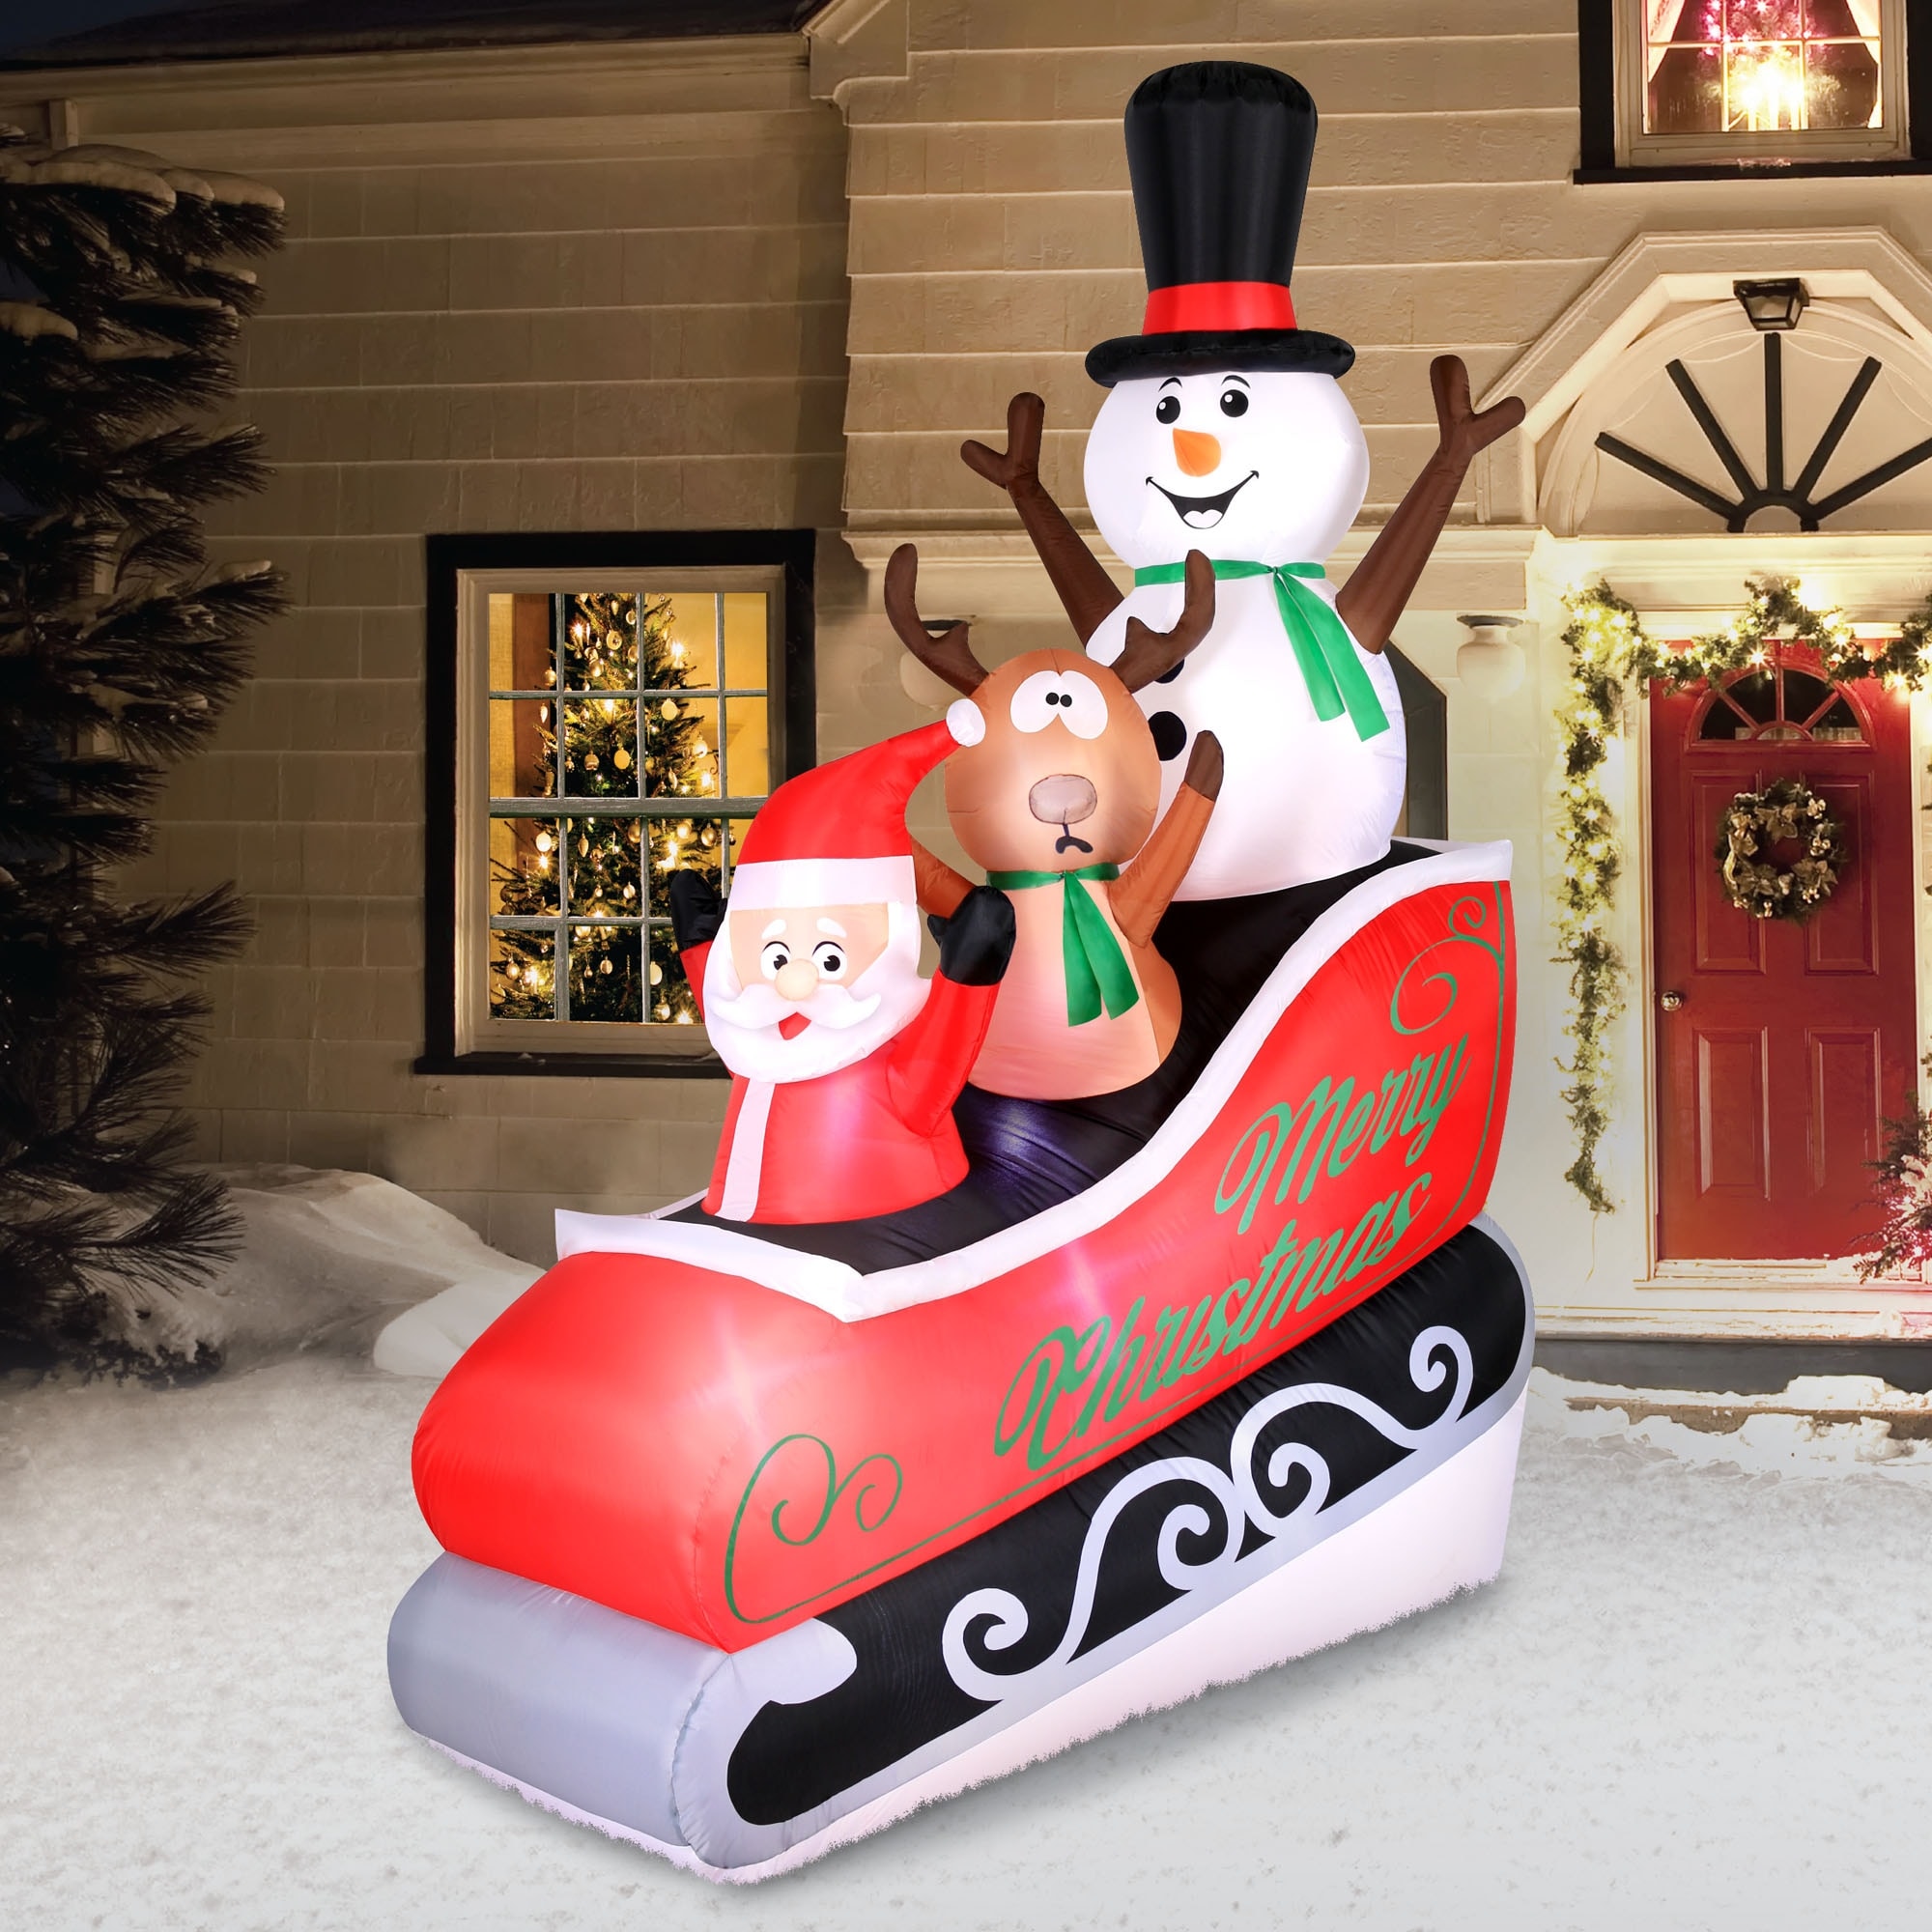 https://ak1.ostkcdn.com/images/products/is/images/direct/ea7c0de81f01734dee1d20badec5a4d81997a2ca/Occasions-Airflowz-Inflatable-Santa-Sleigh-Ride%2C-8-ft-Tall%2C-Red.jpg